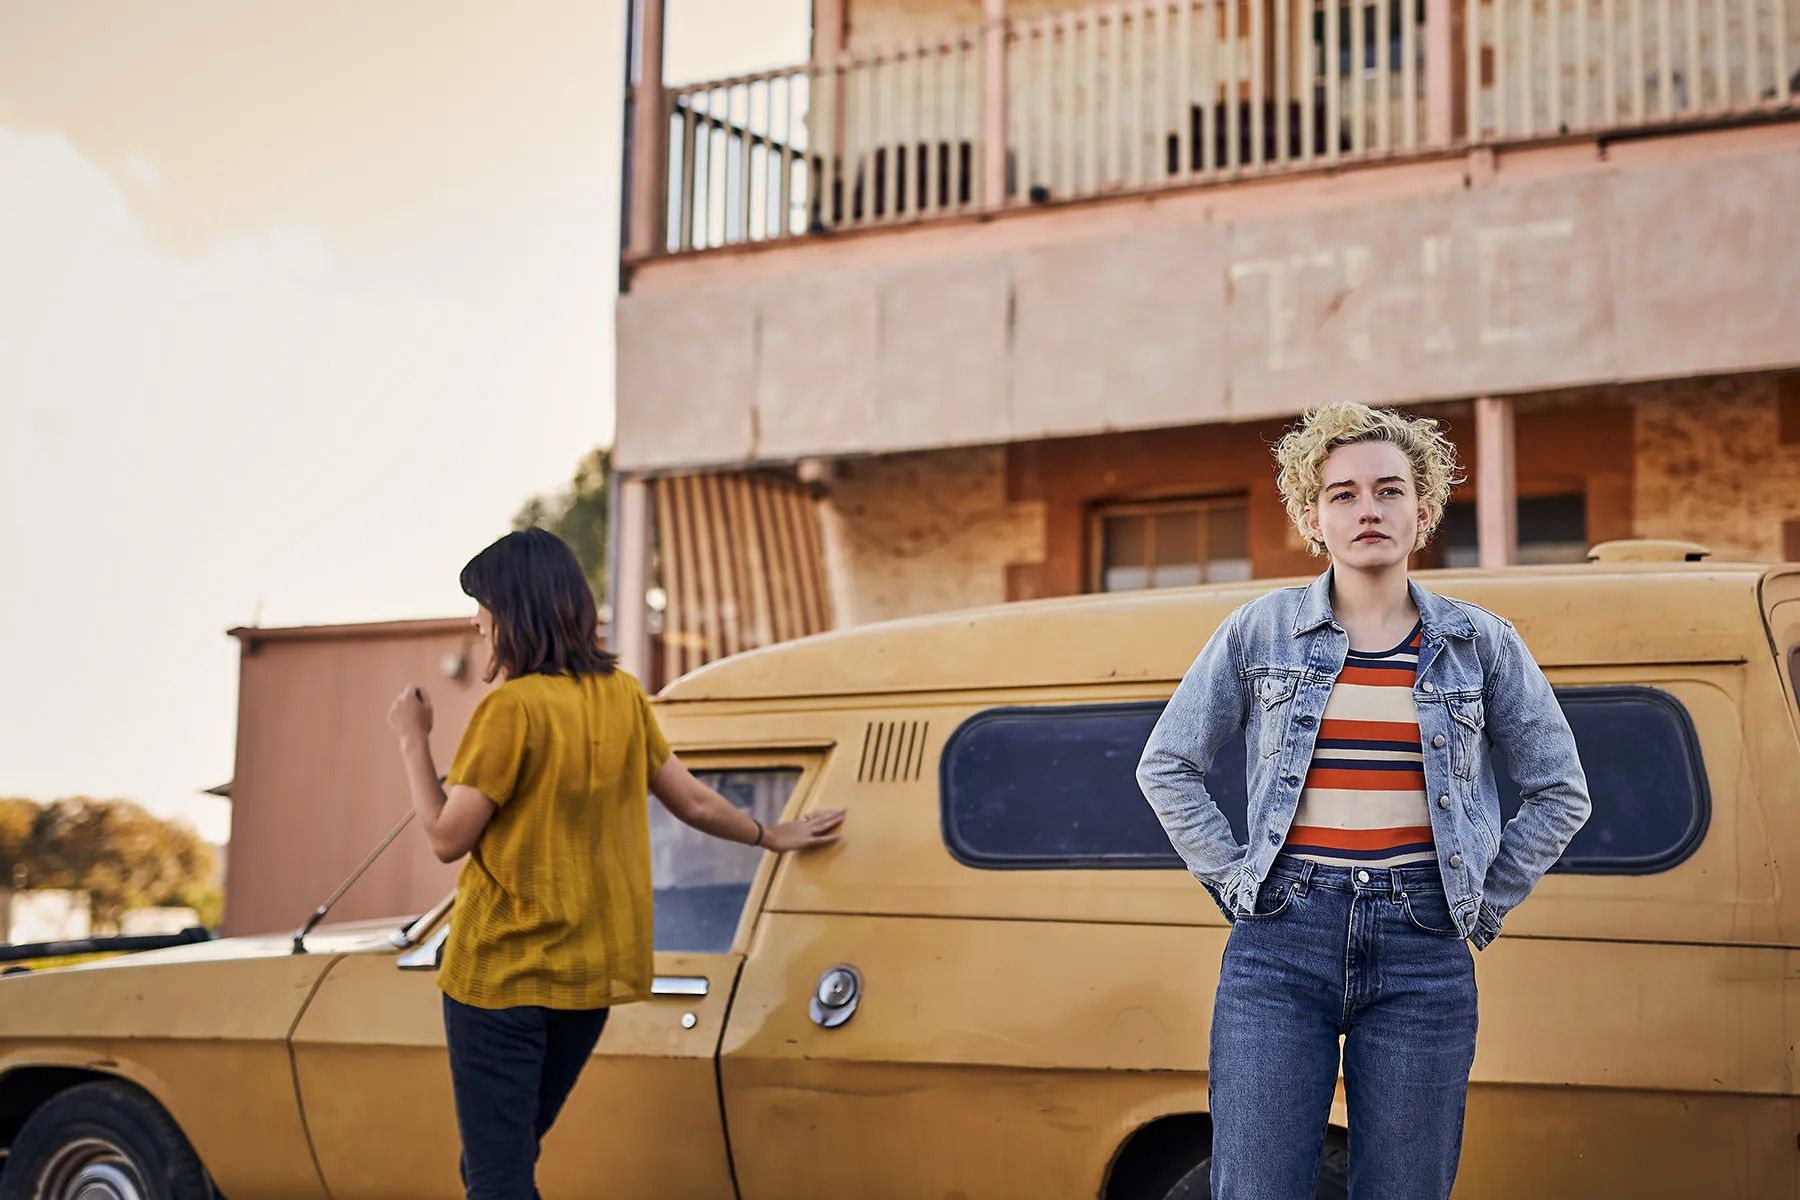 Two yong women stand in front of a yellow car parked in front of a rustic hotel.